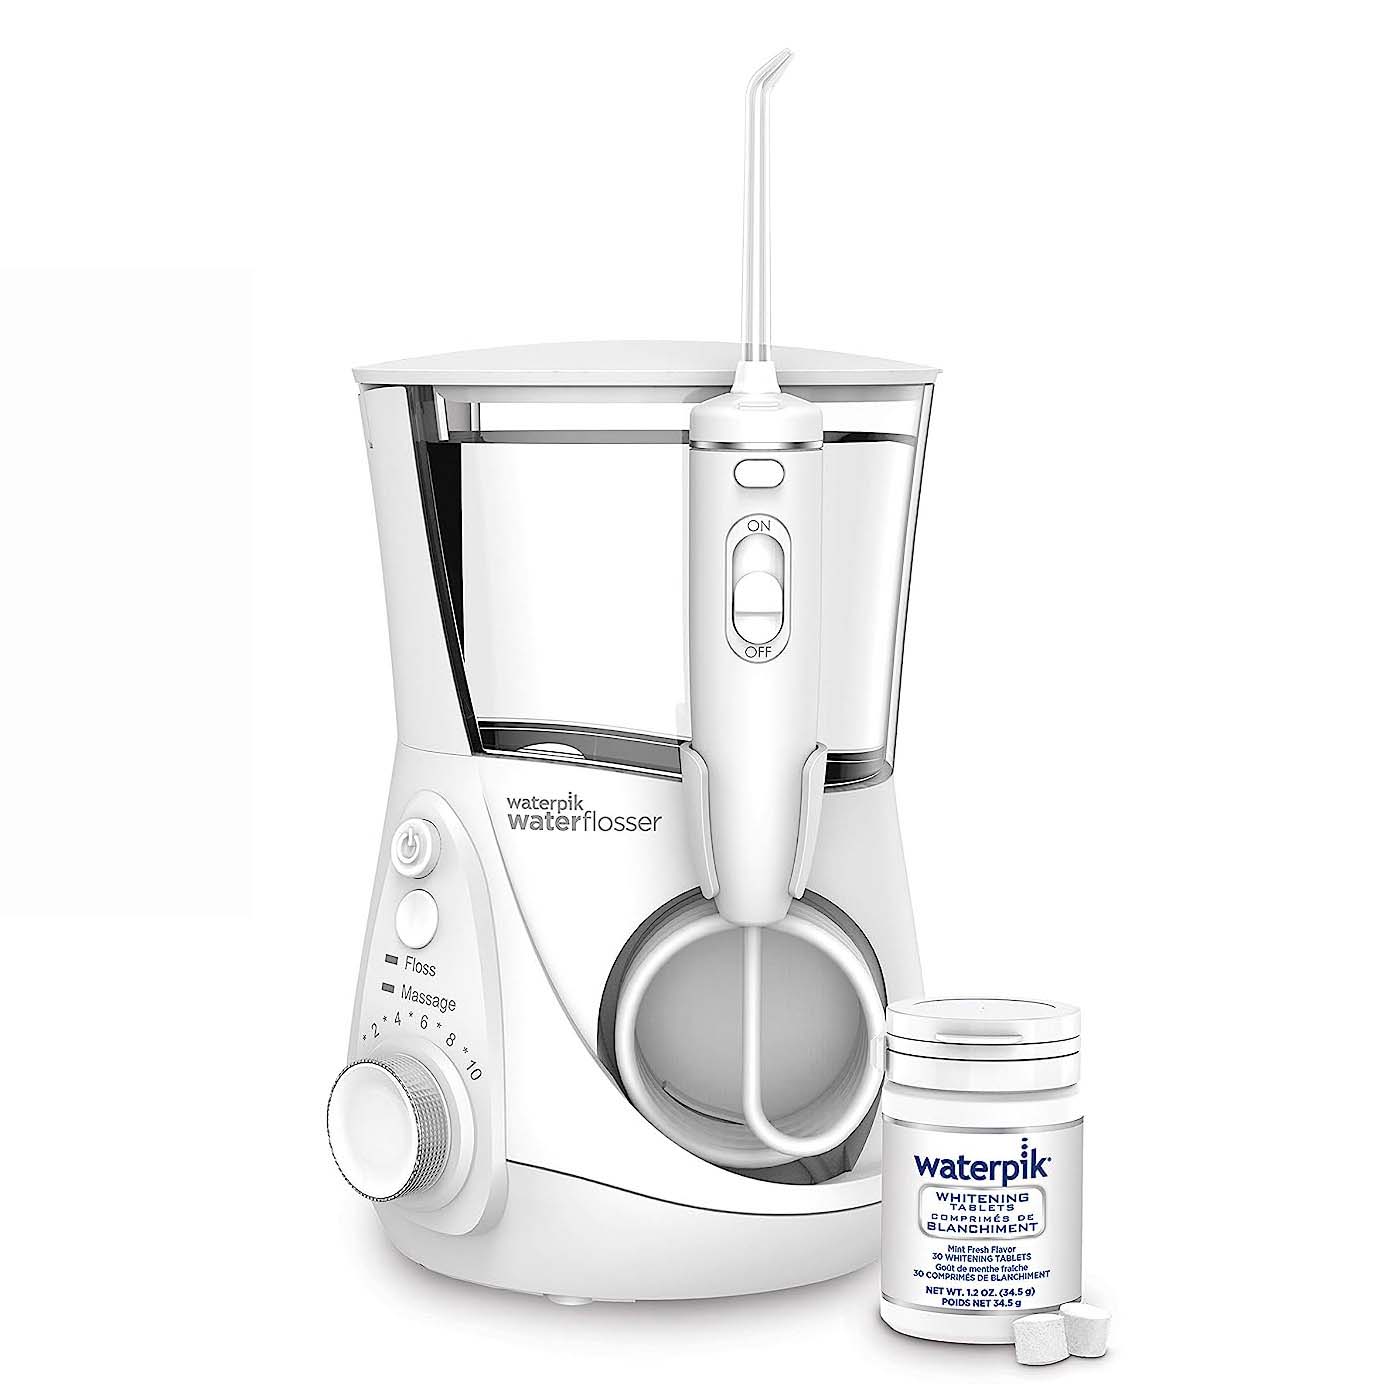 whitening water flosser with large basin and bottle of whitening tablets